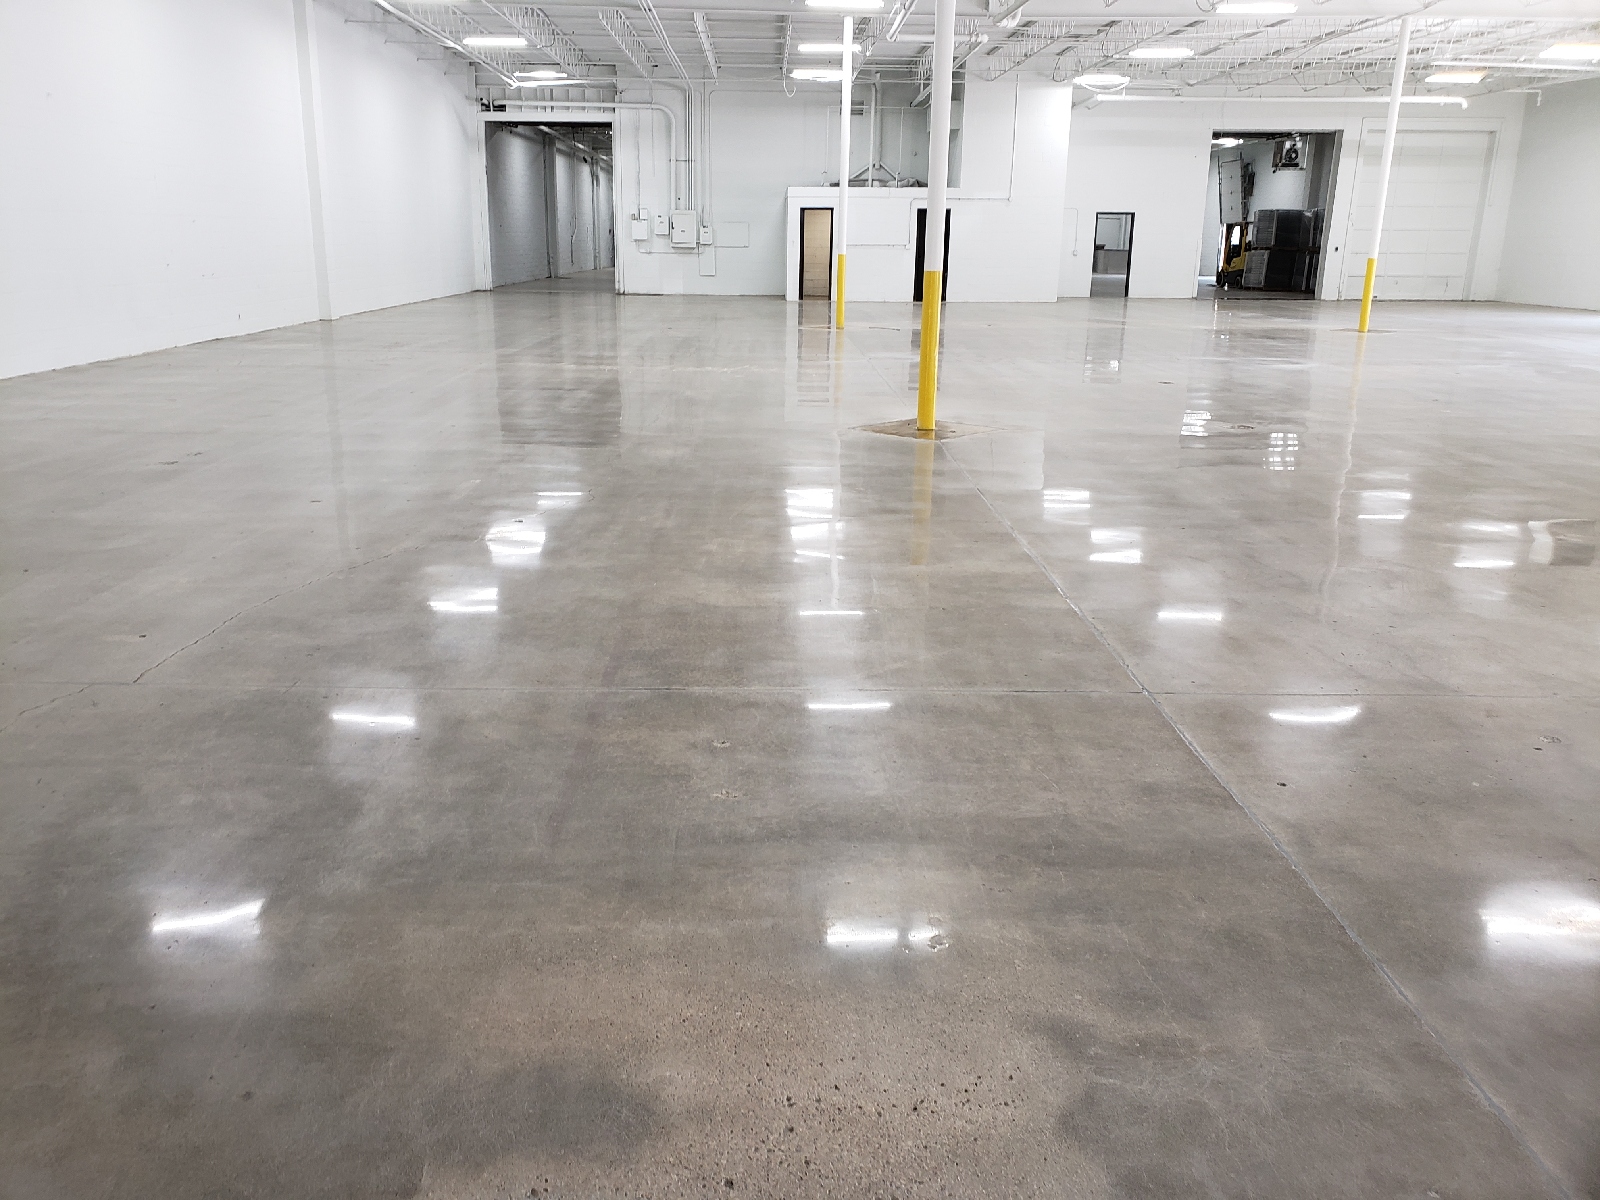 Polished concrete floor in a commercial space